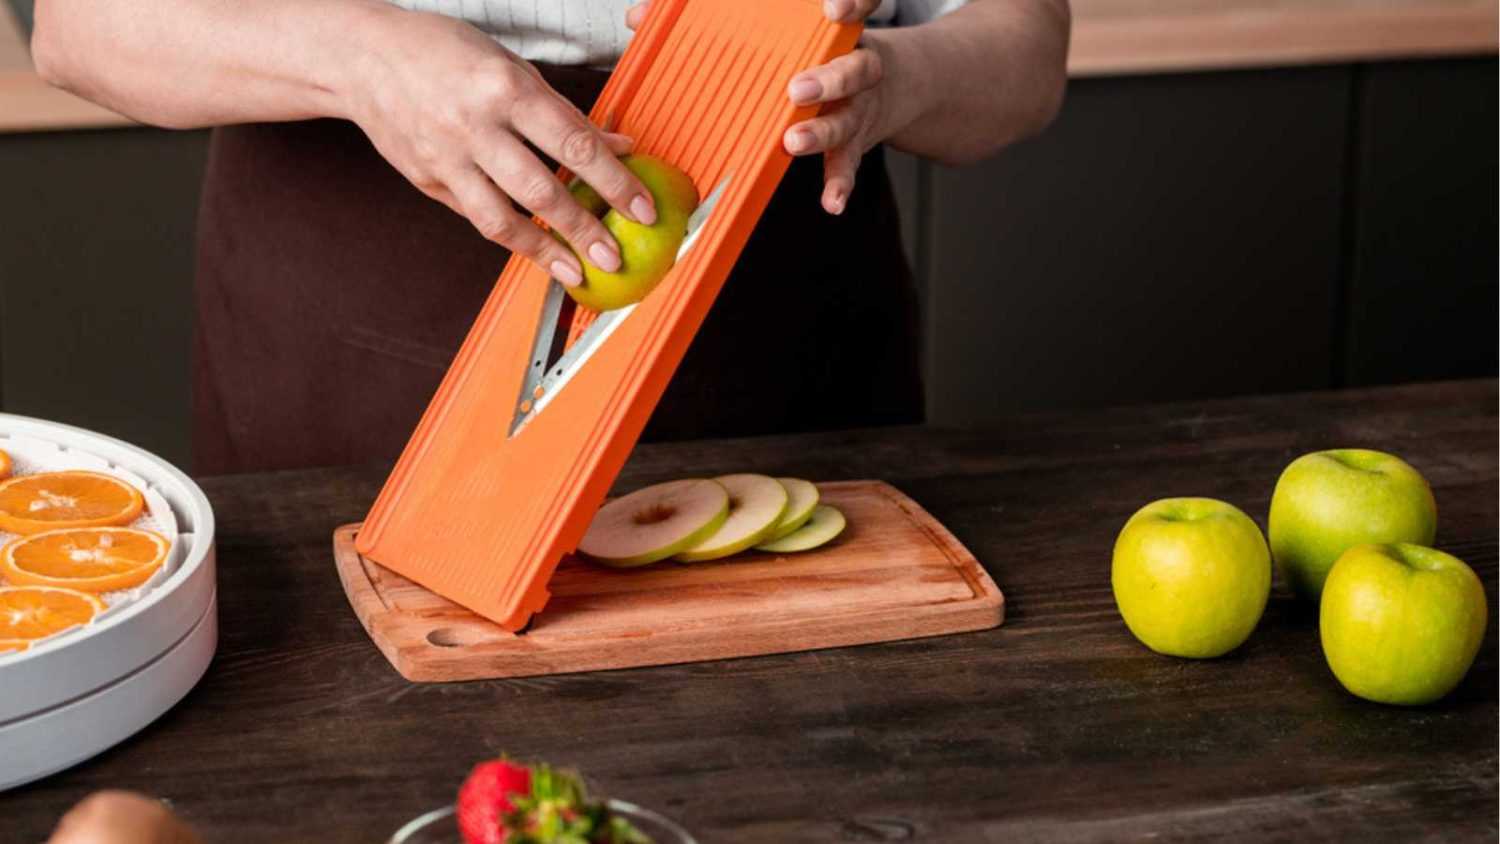 Close-up of unrecognizable woman using mandoline slicer for cutting apple while preparing fruits for dehydration at home